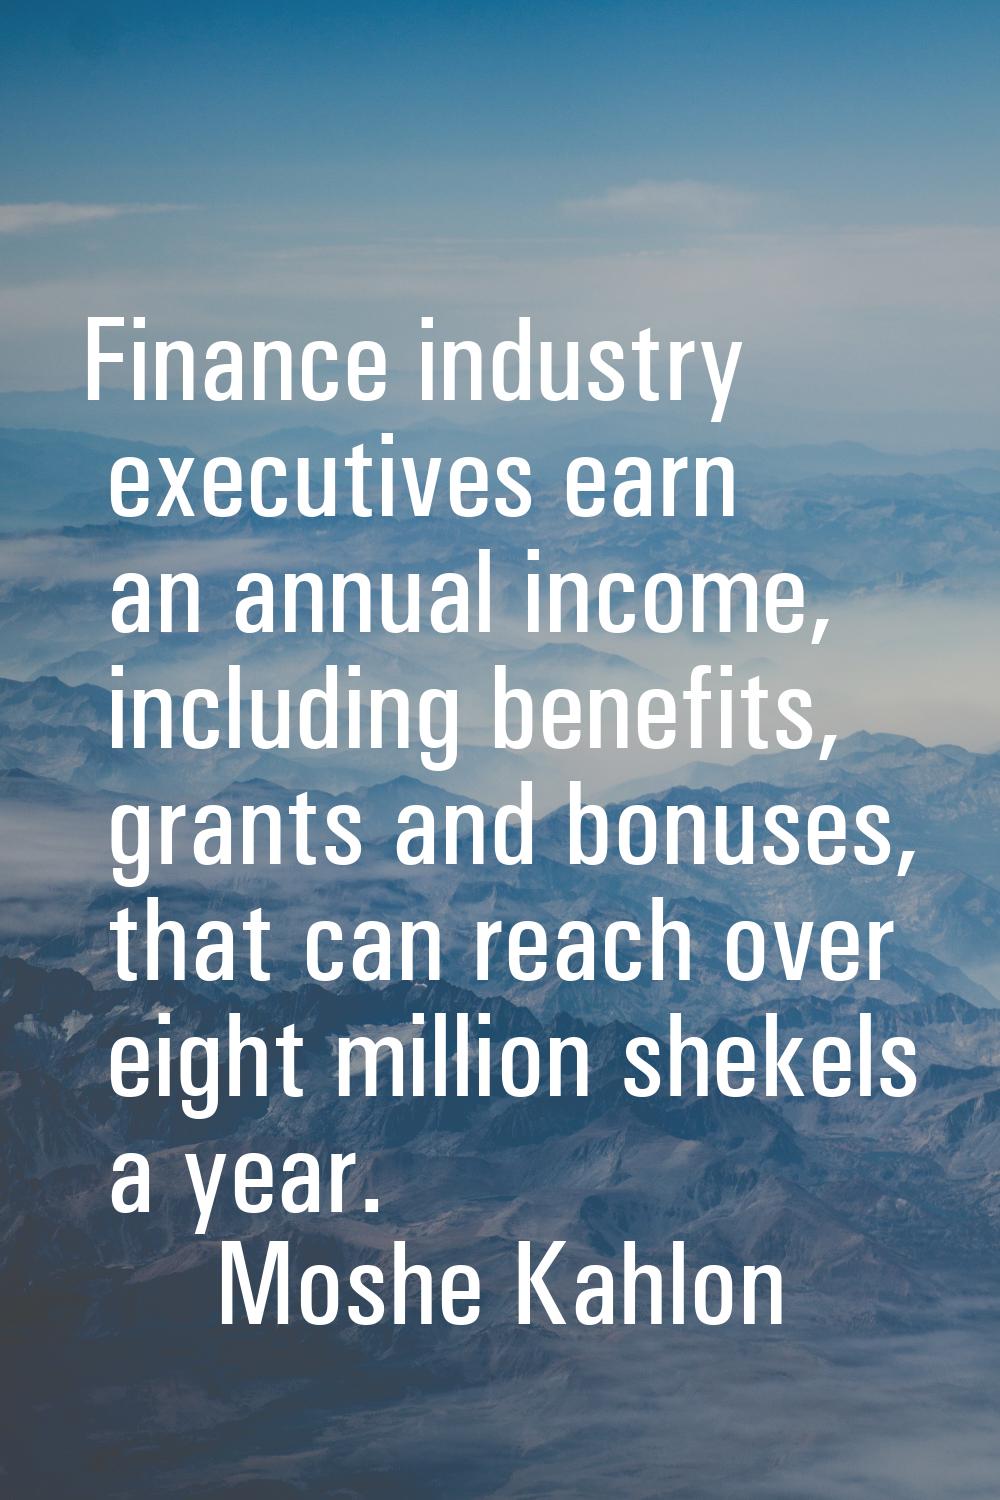 Finance industry executives earn an annual income, including benefits, grants and bonuses, that can